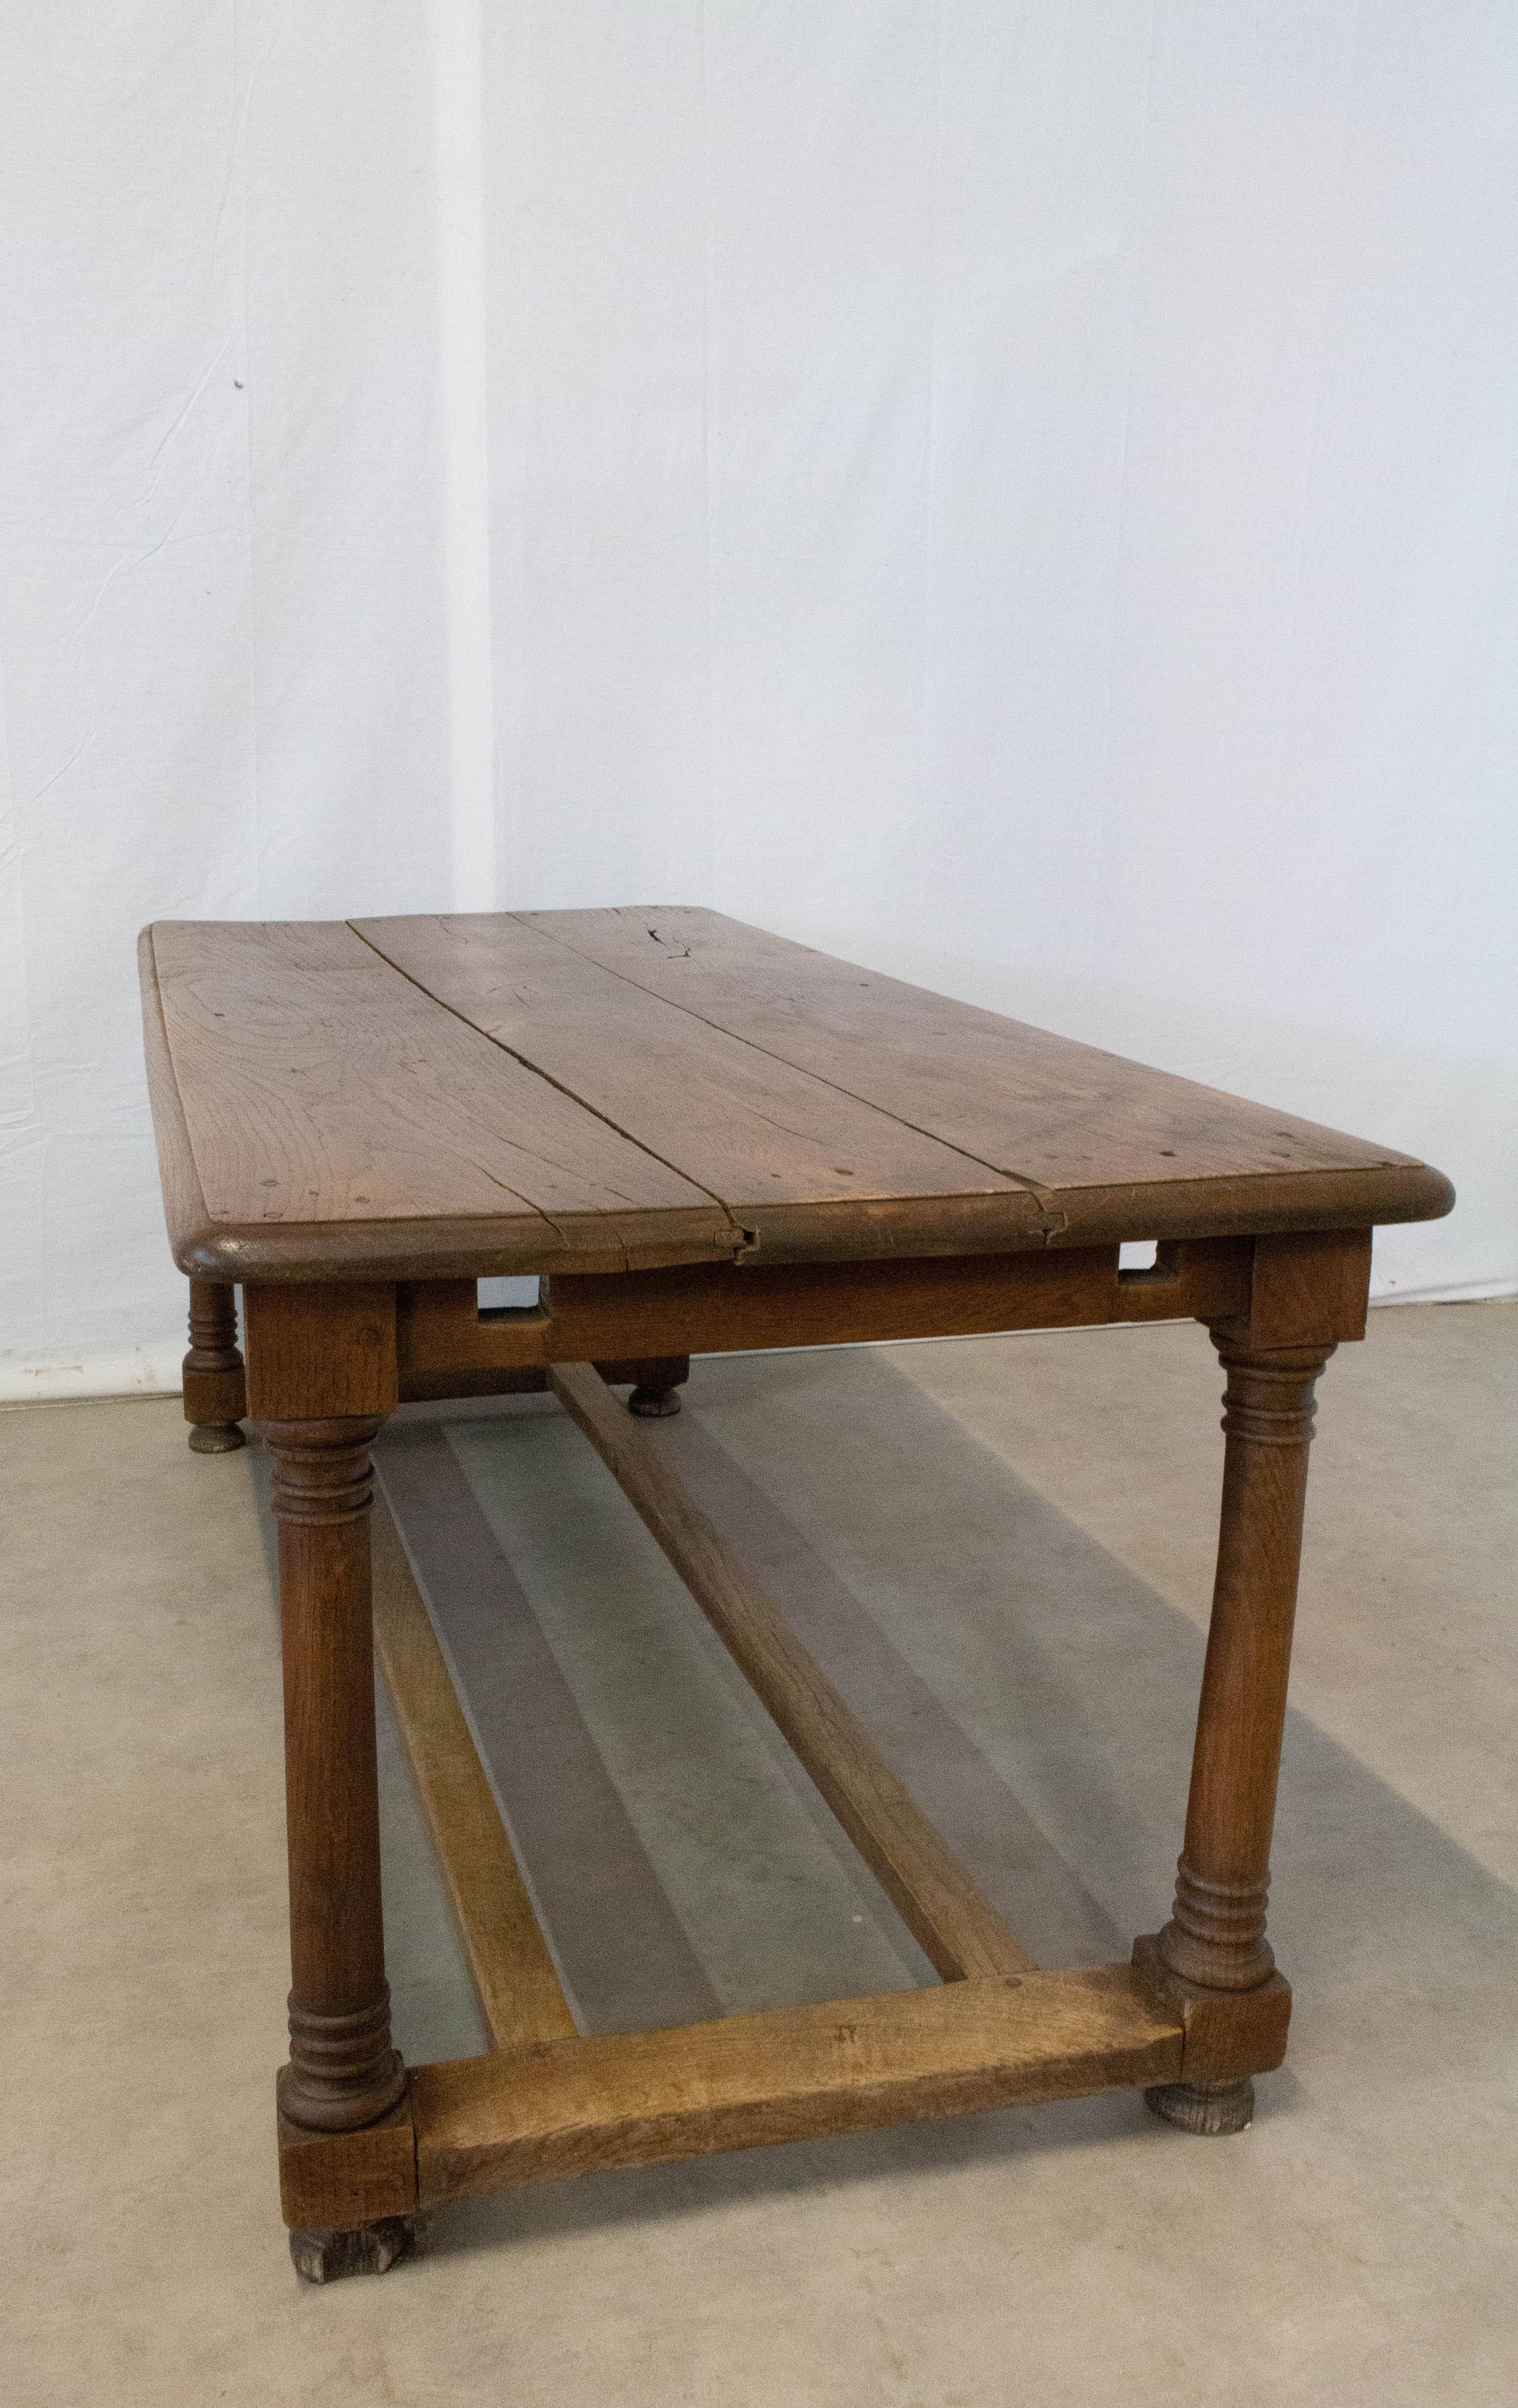 French refectory table late 18th century French Provincial oak
French country house server, dining table
This refectory dining table (reminiscent of French Drapers Tables) this came from a French Chateau in the South of France where it had been